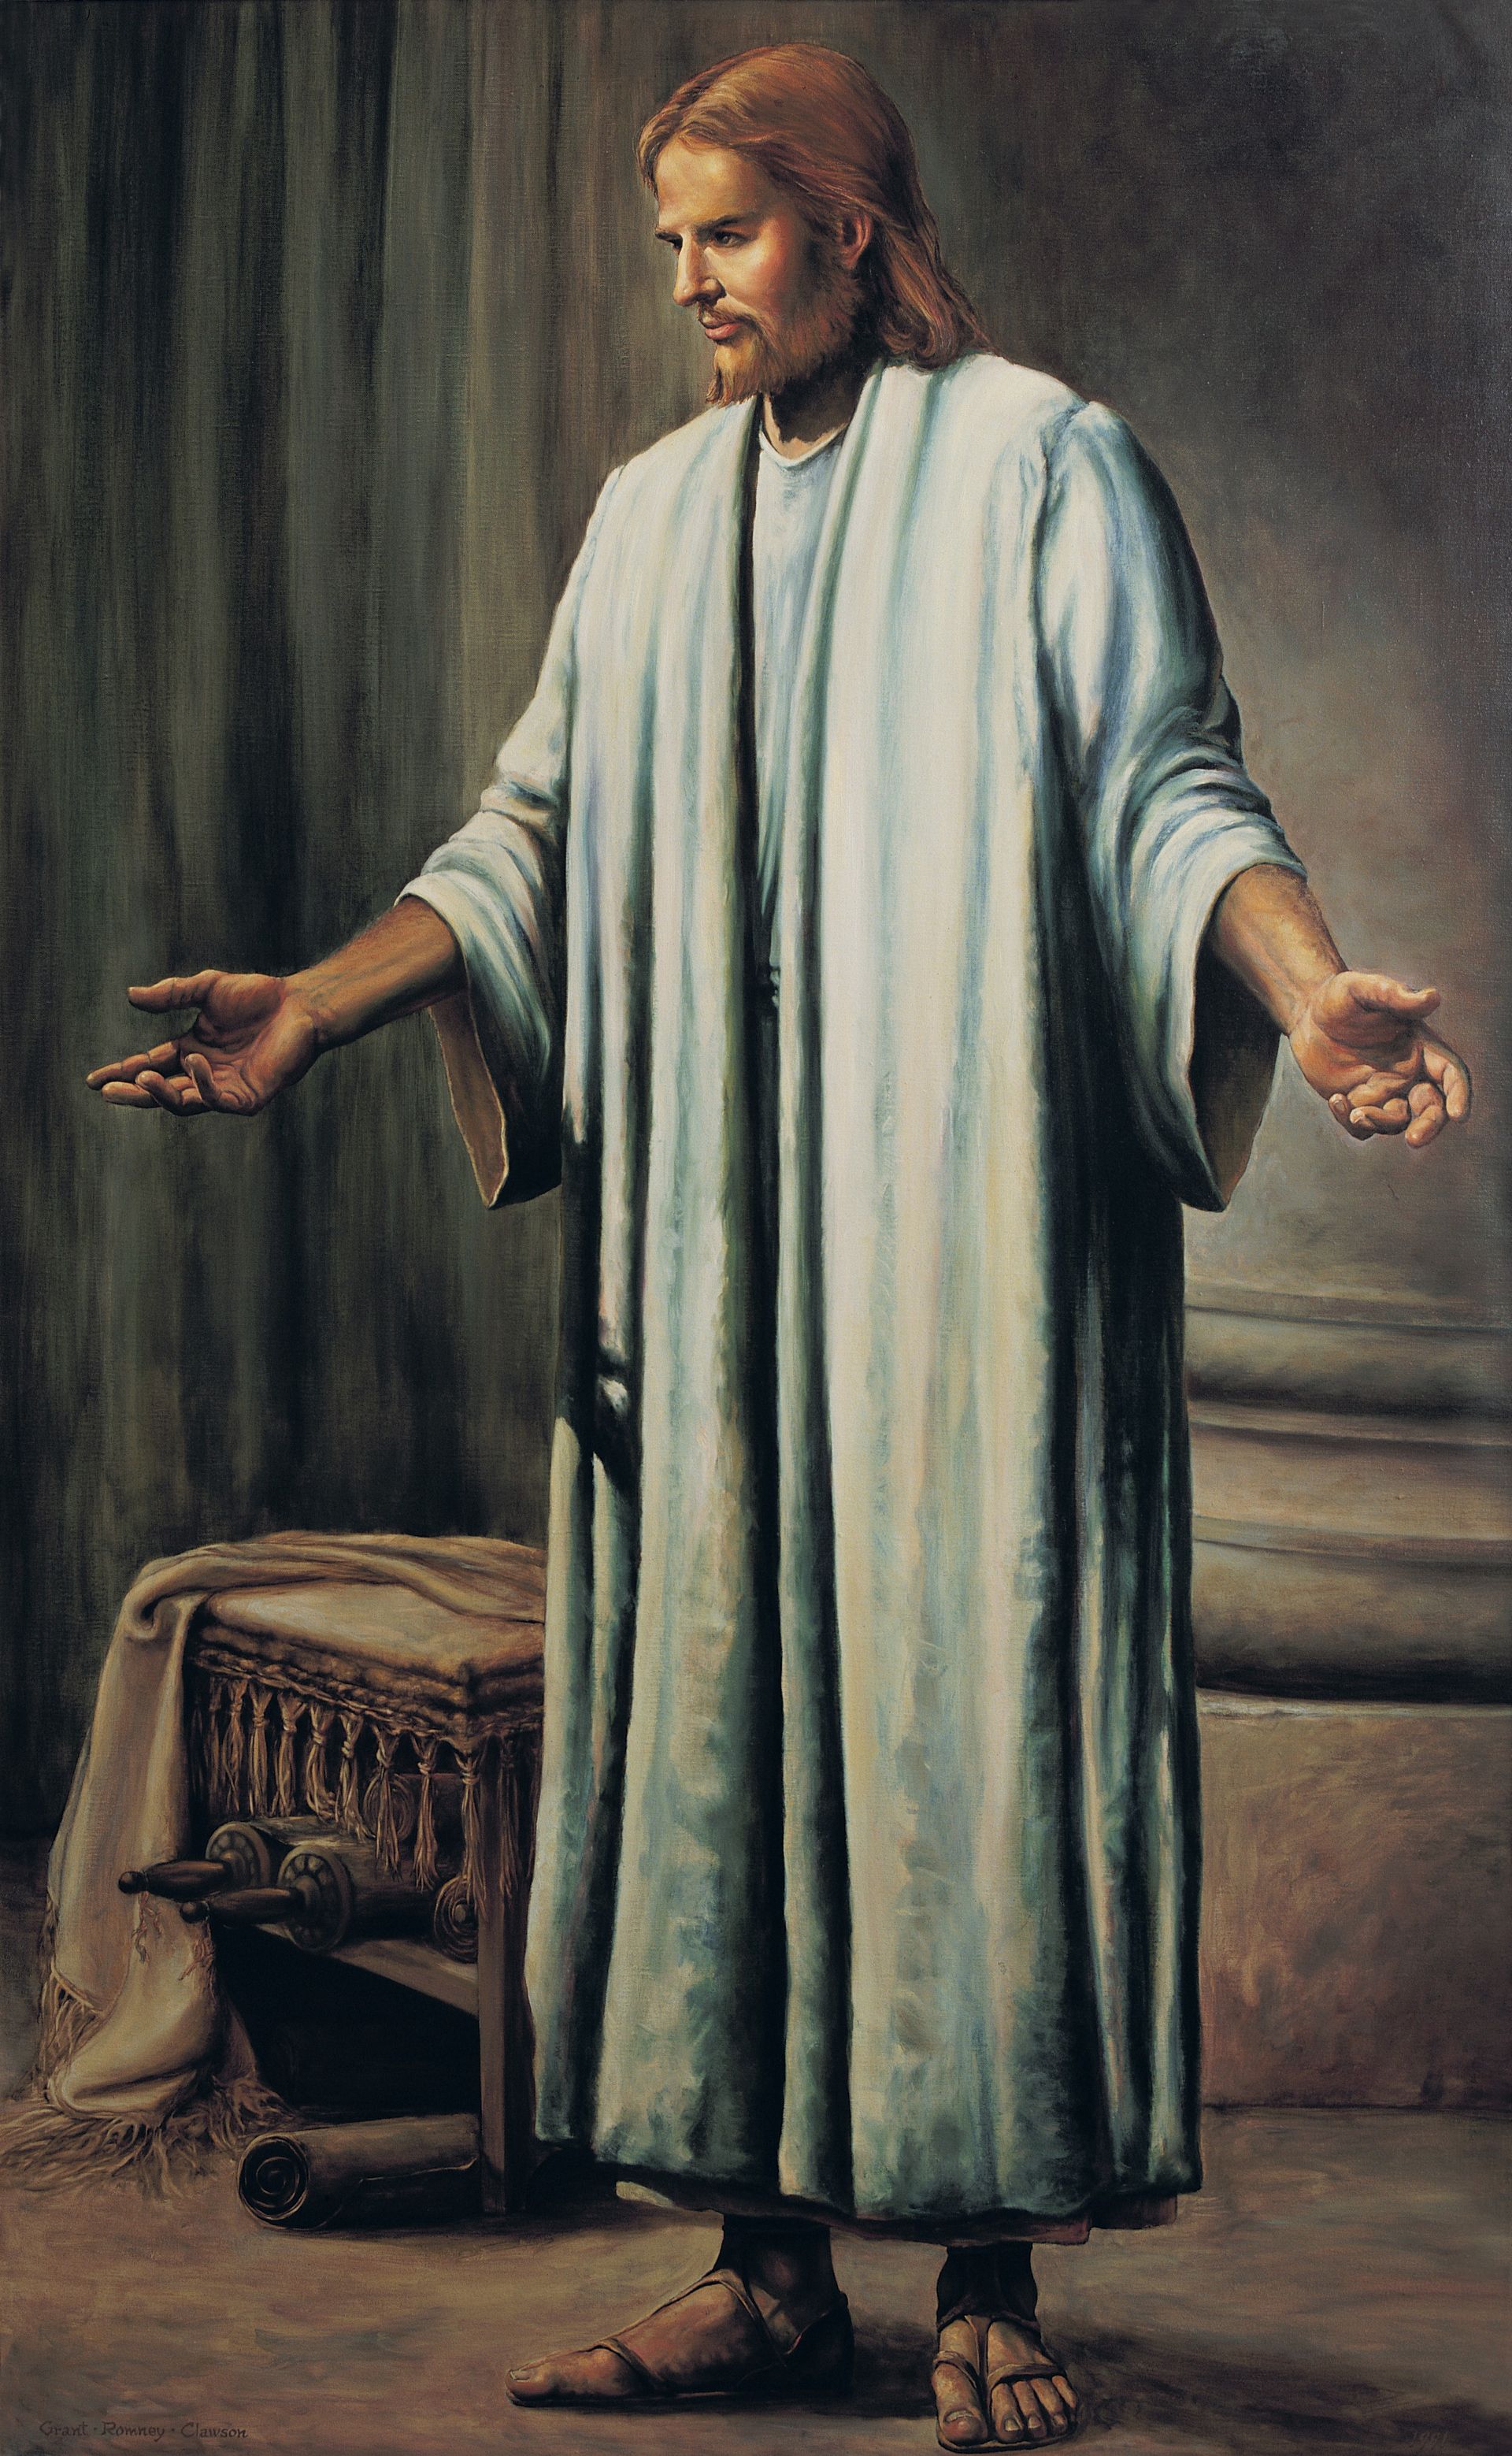 Jesus Christ in White Robes, by Grant Romney Clawson